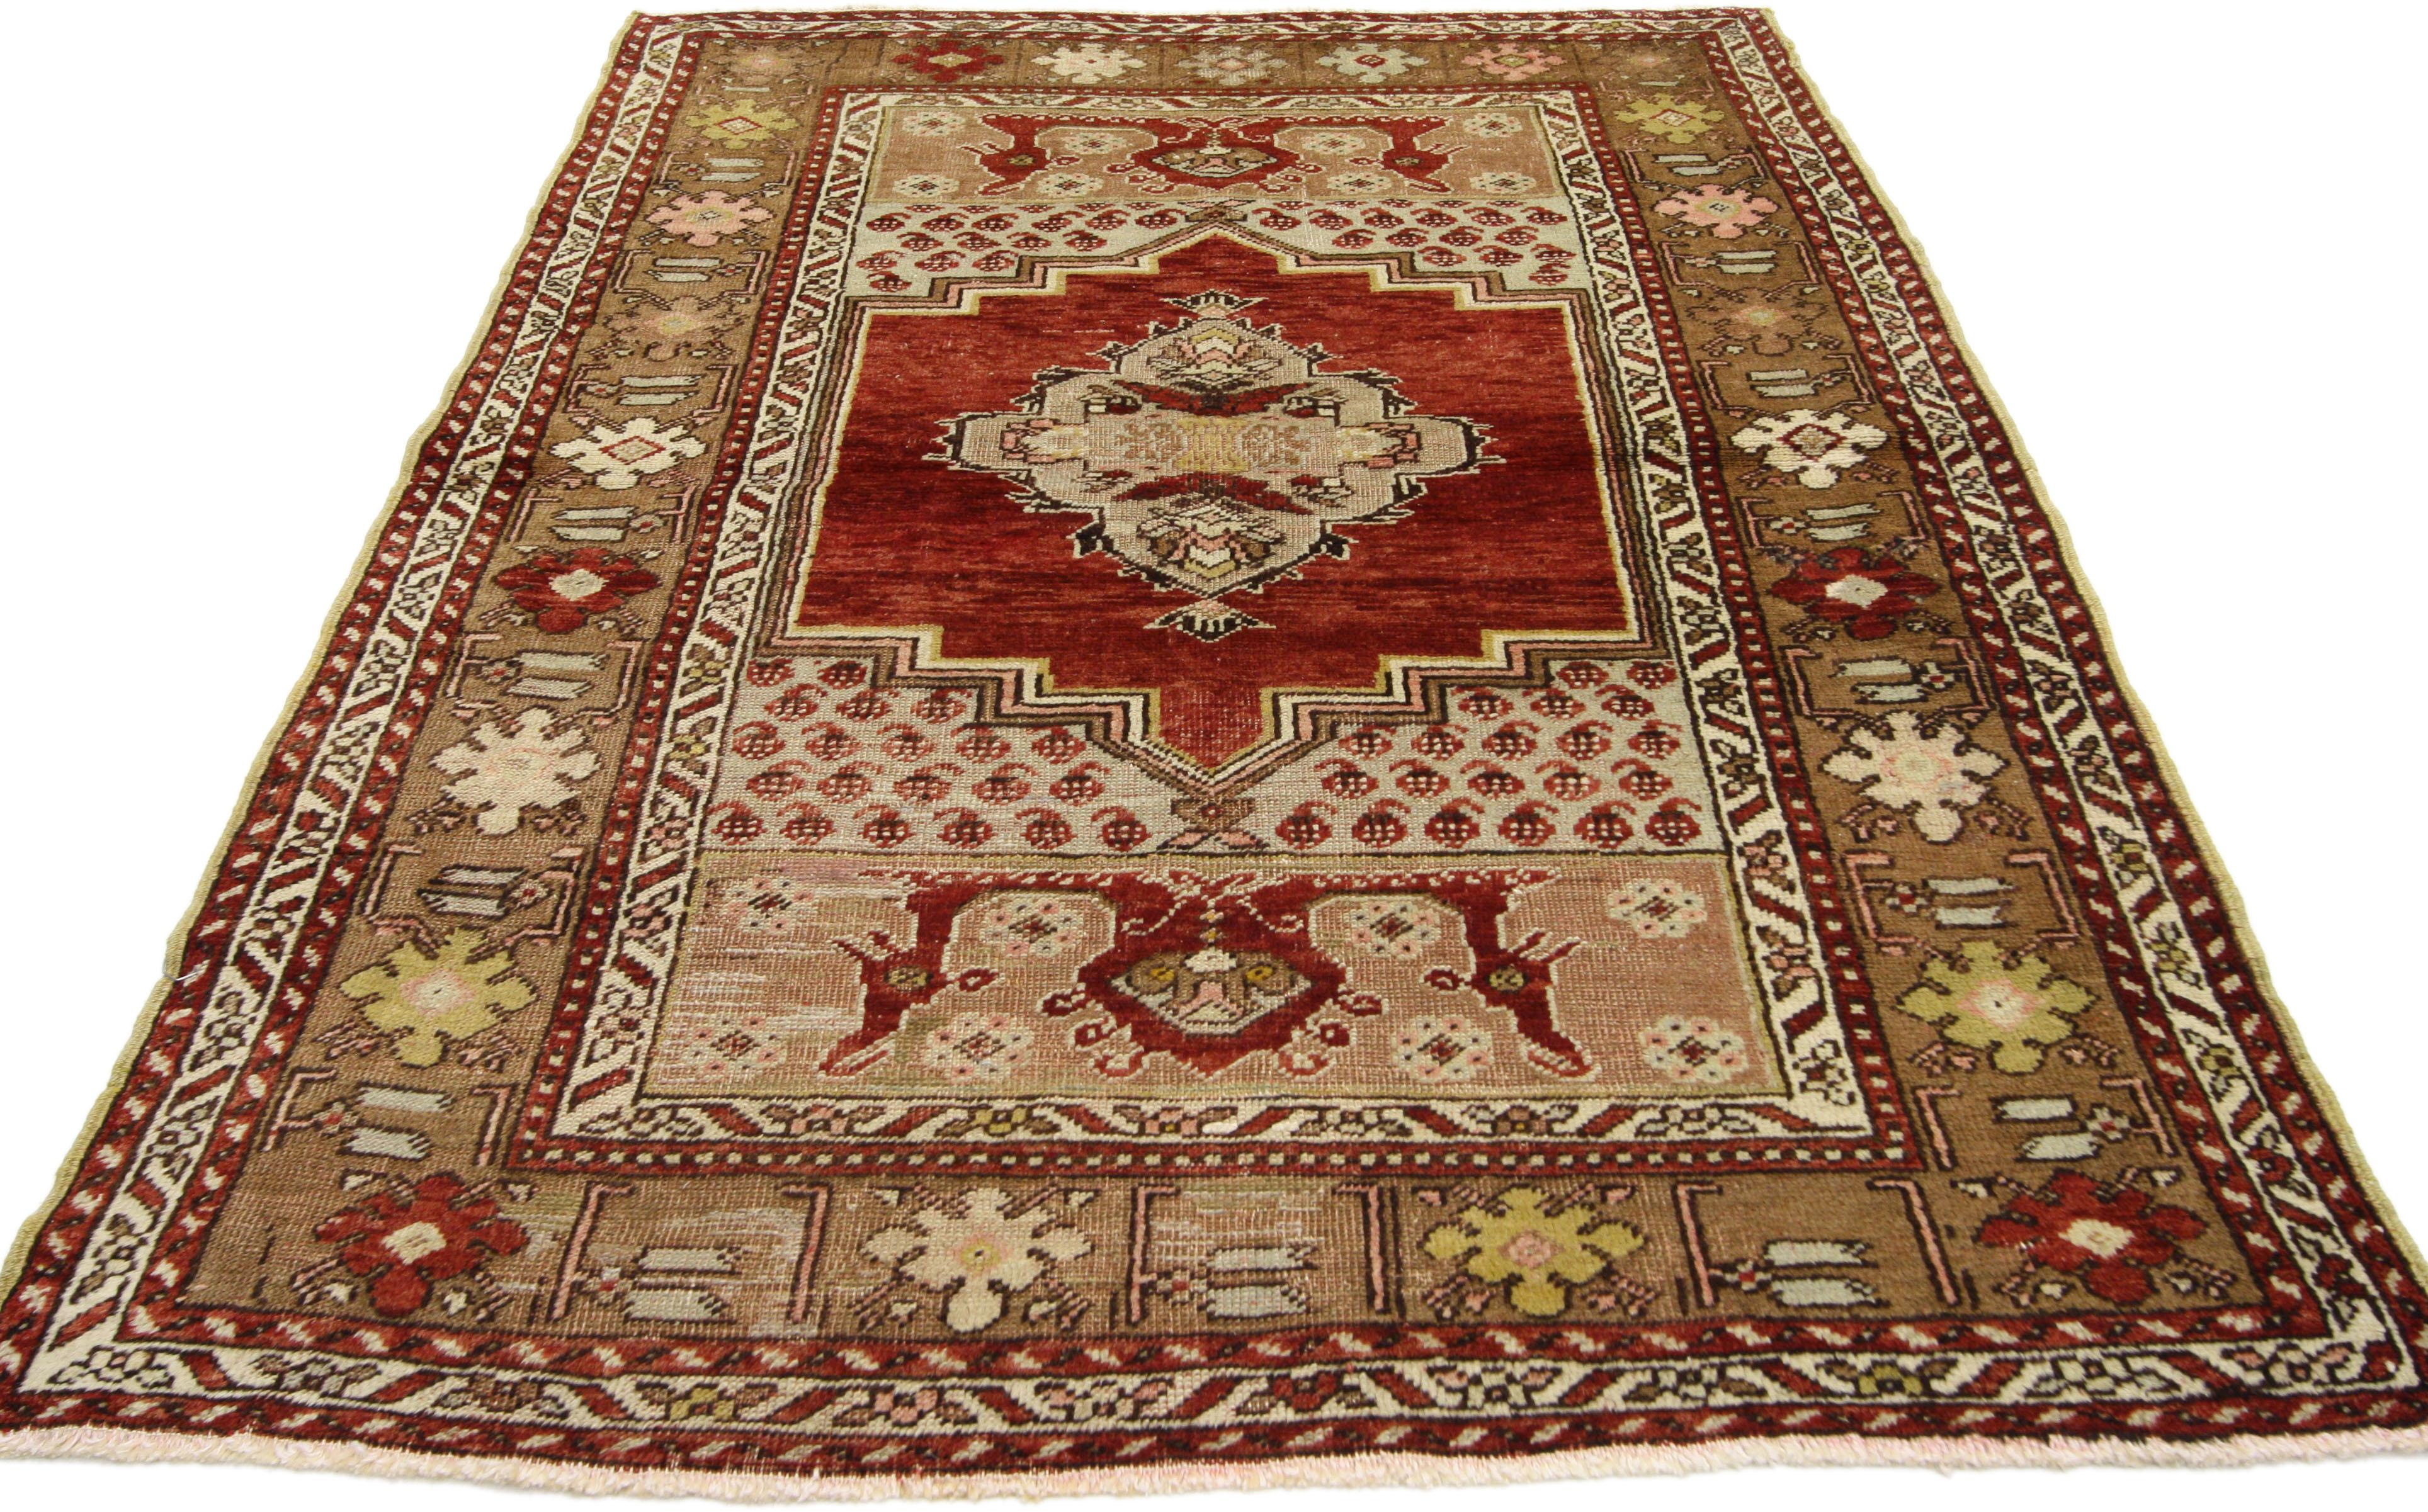 50142 Vintage Turkish Oushak Accent Rug with Traditional Style. Warm and inviting, this hand-knotted wool vintage Turkish Oushak rug features a modern traditional style. Immersed in Anatolian history and refined colors, this vintage Oushak rug